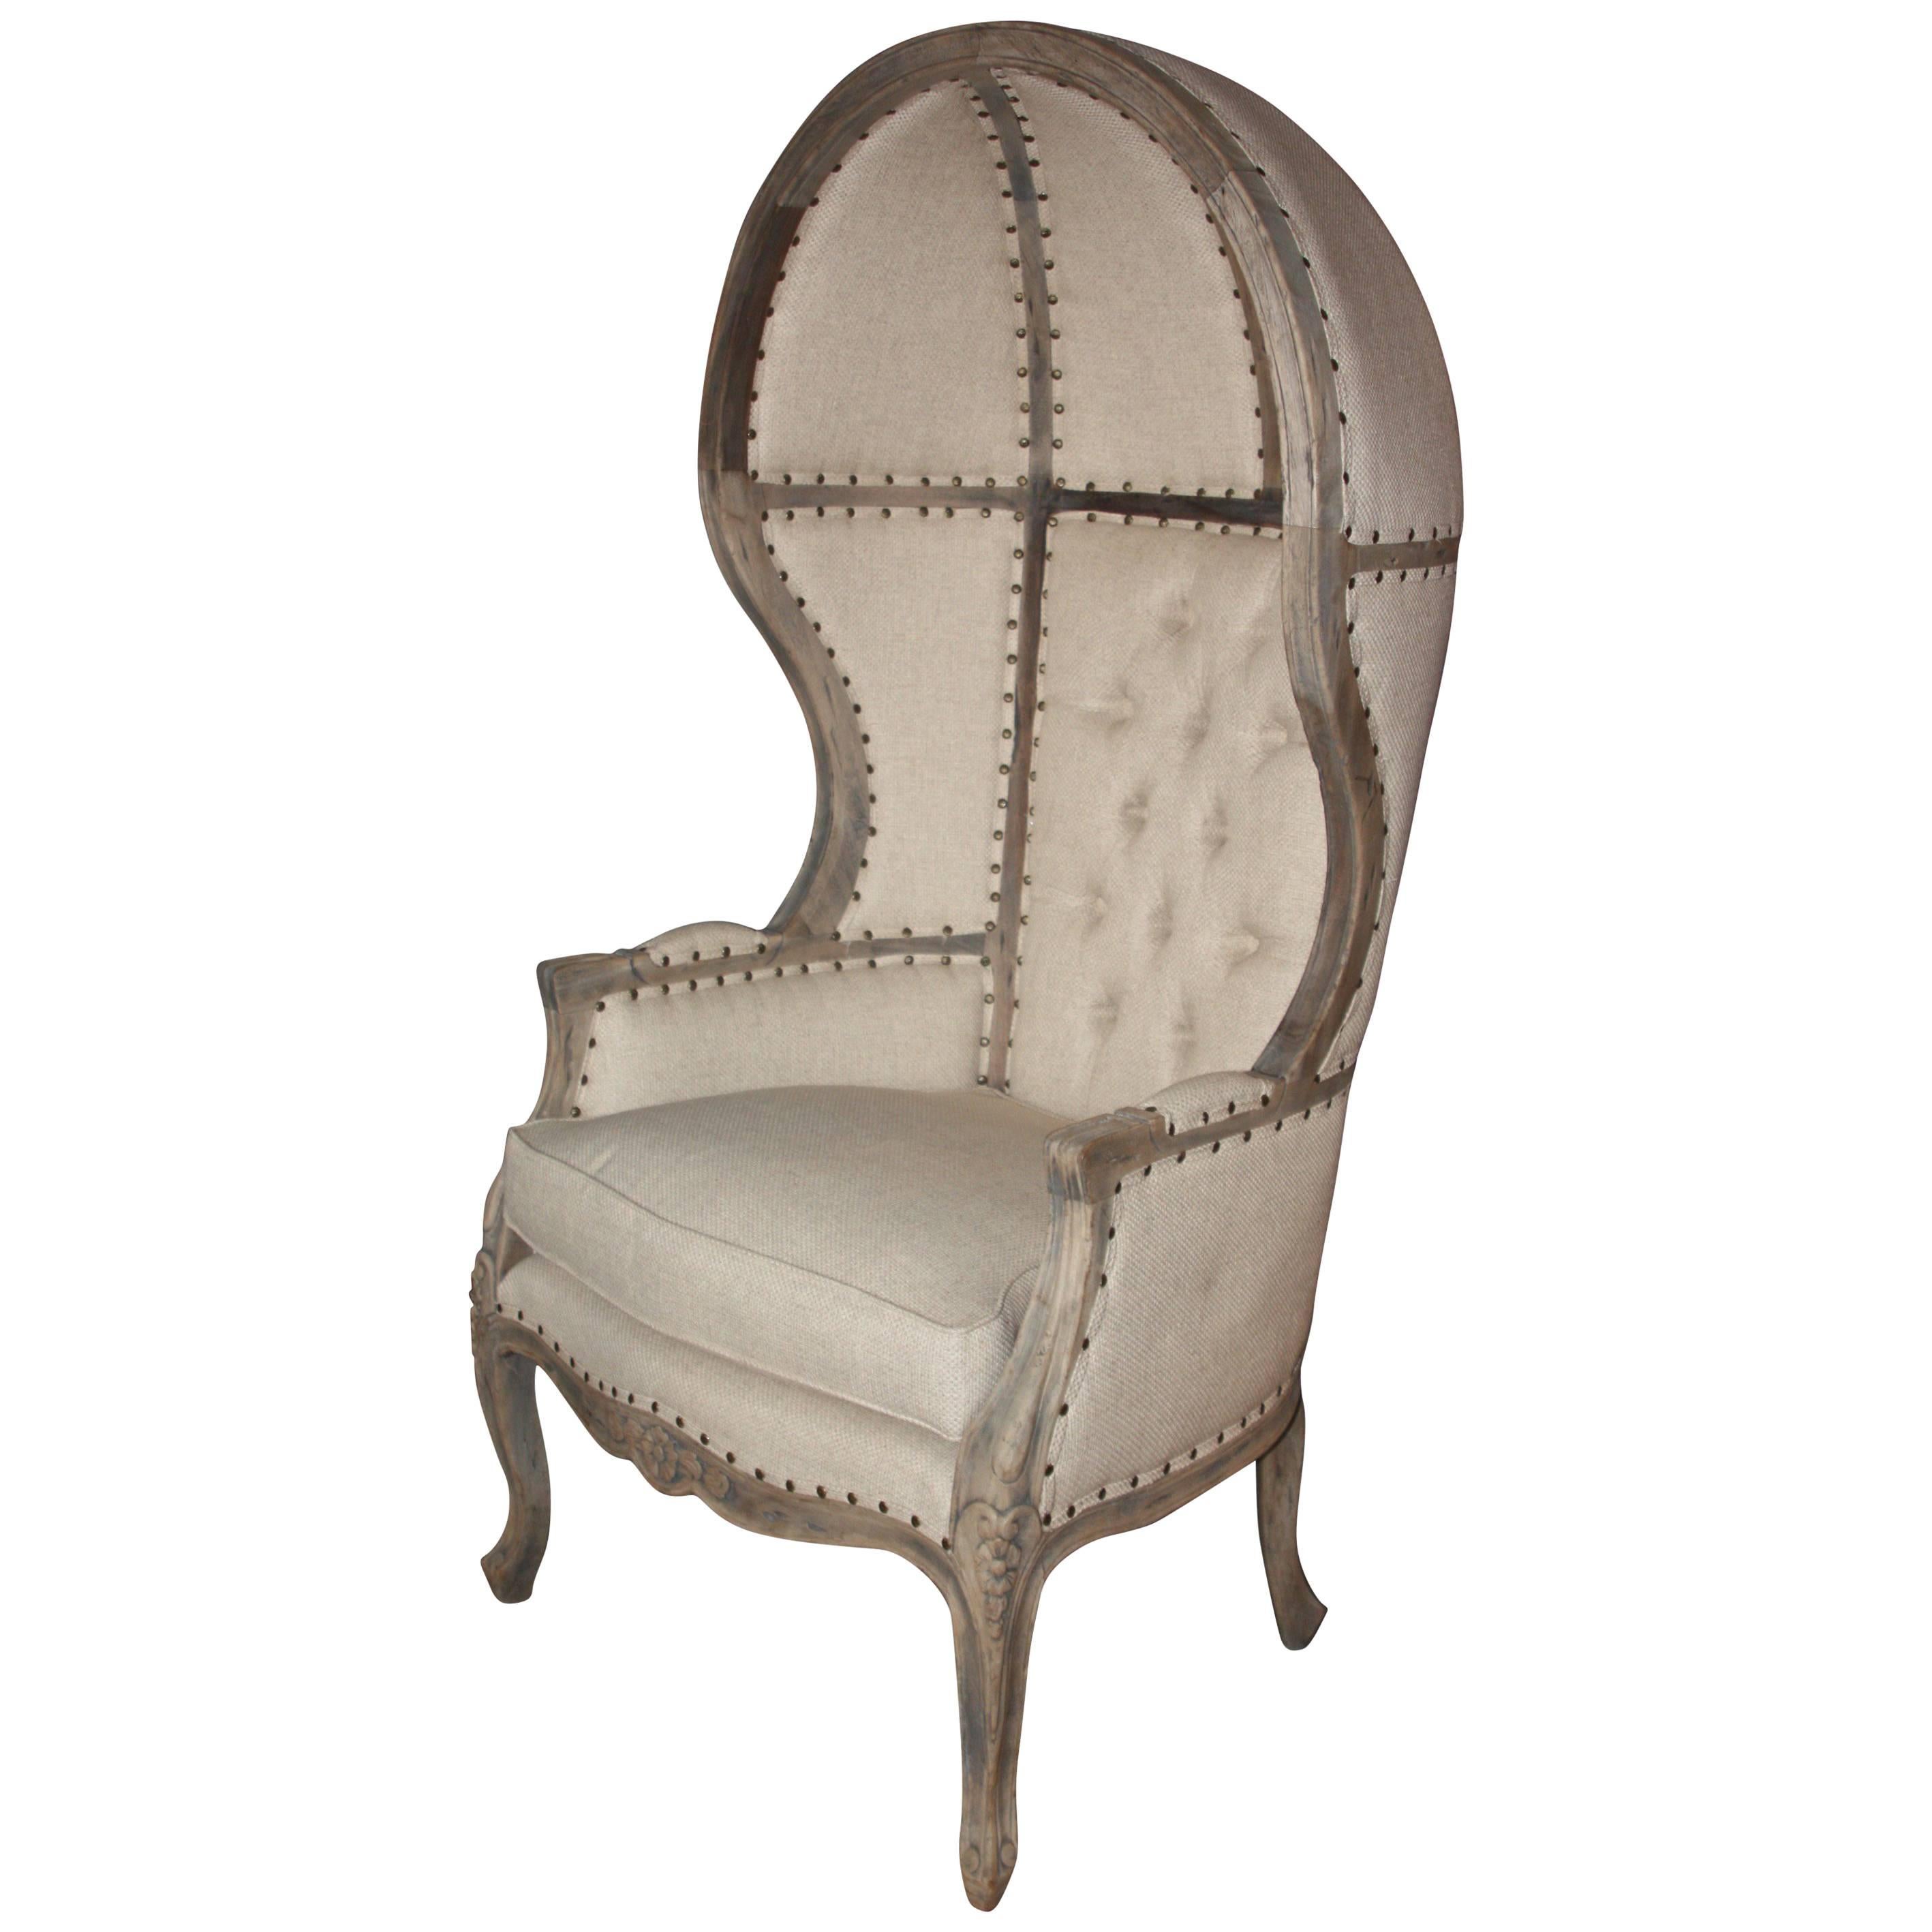 19th Century French Canopy Chair